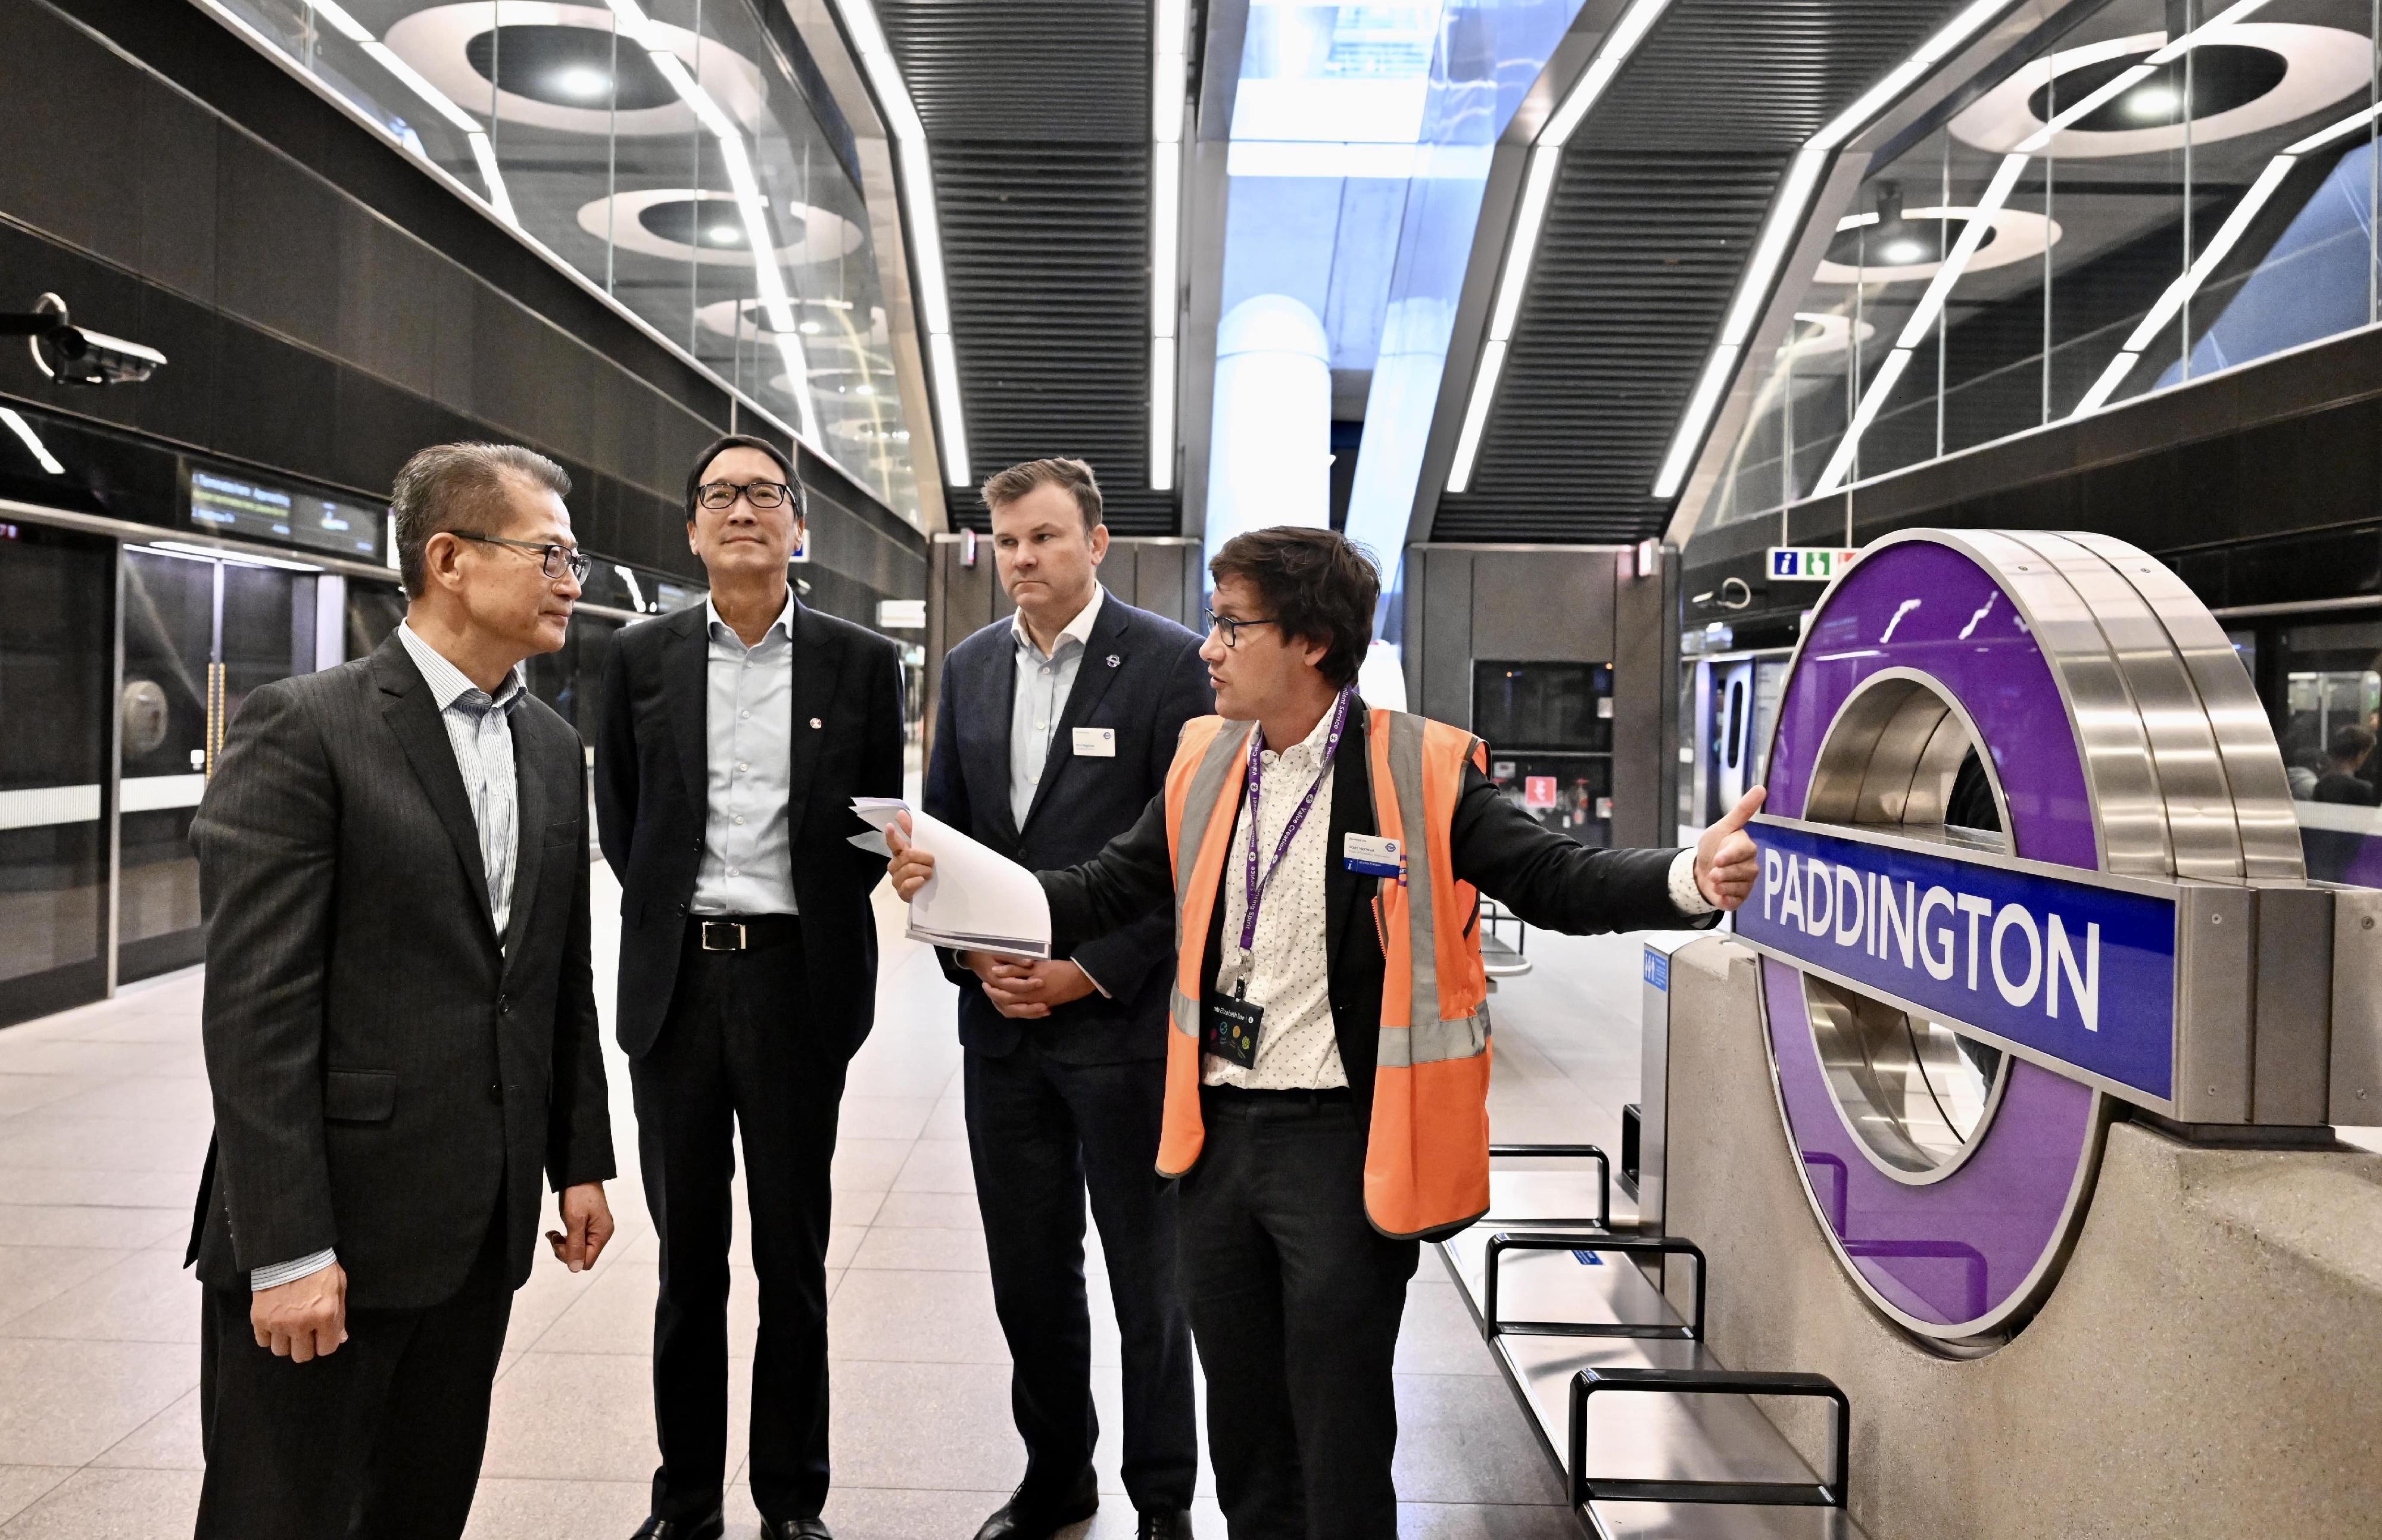 The Financial Secretary, Mr Paul Chan, continued his visit to London yesterday (September 23, London time). He visited Paddington Station in London to understand the operation of London's Elizabeth line, which is run by MTR Elizabeth line, a wholly-owned subsidiary of the MTR Corporation. Photo shows Mr Chan (first left) receiving a briefing from Elizabeth line's responsible staff on the operation of the line, at Paddington Station platform.